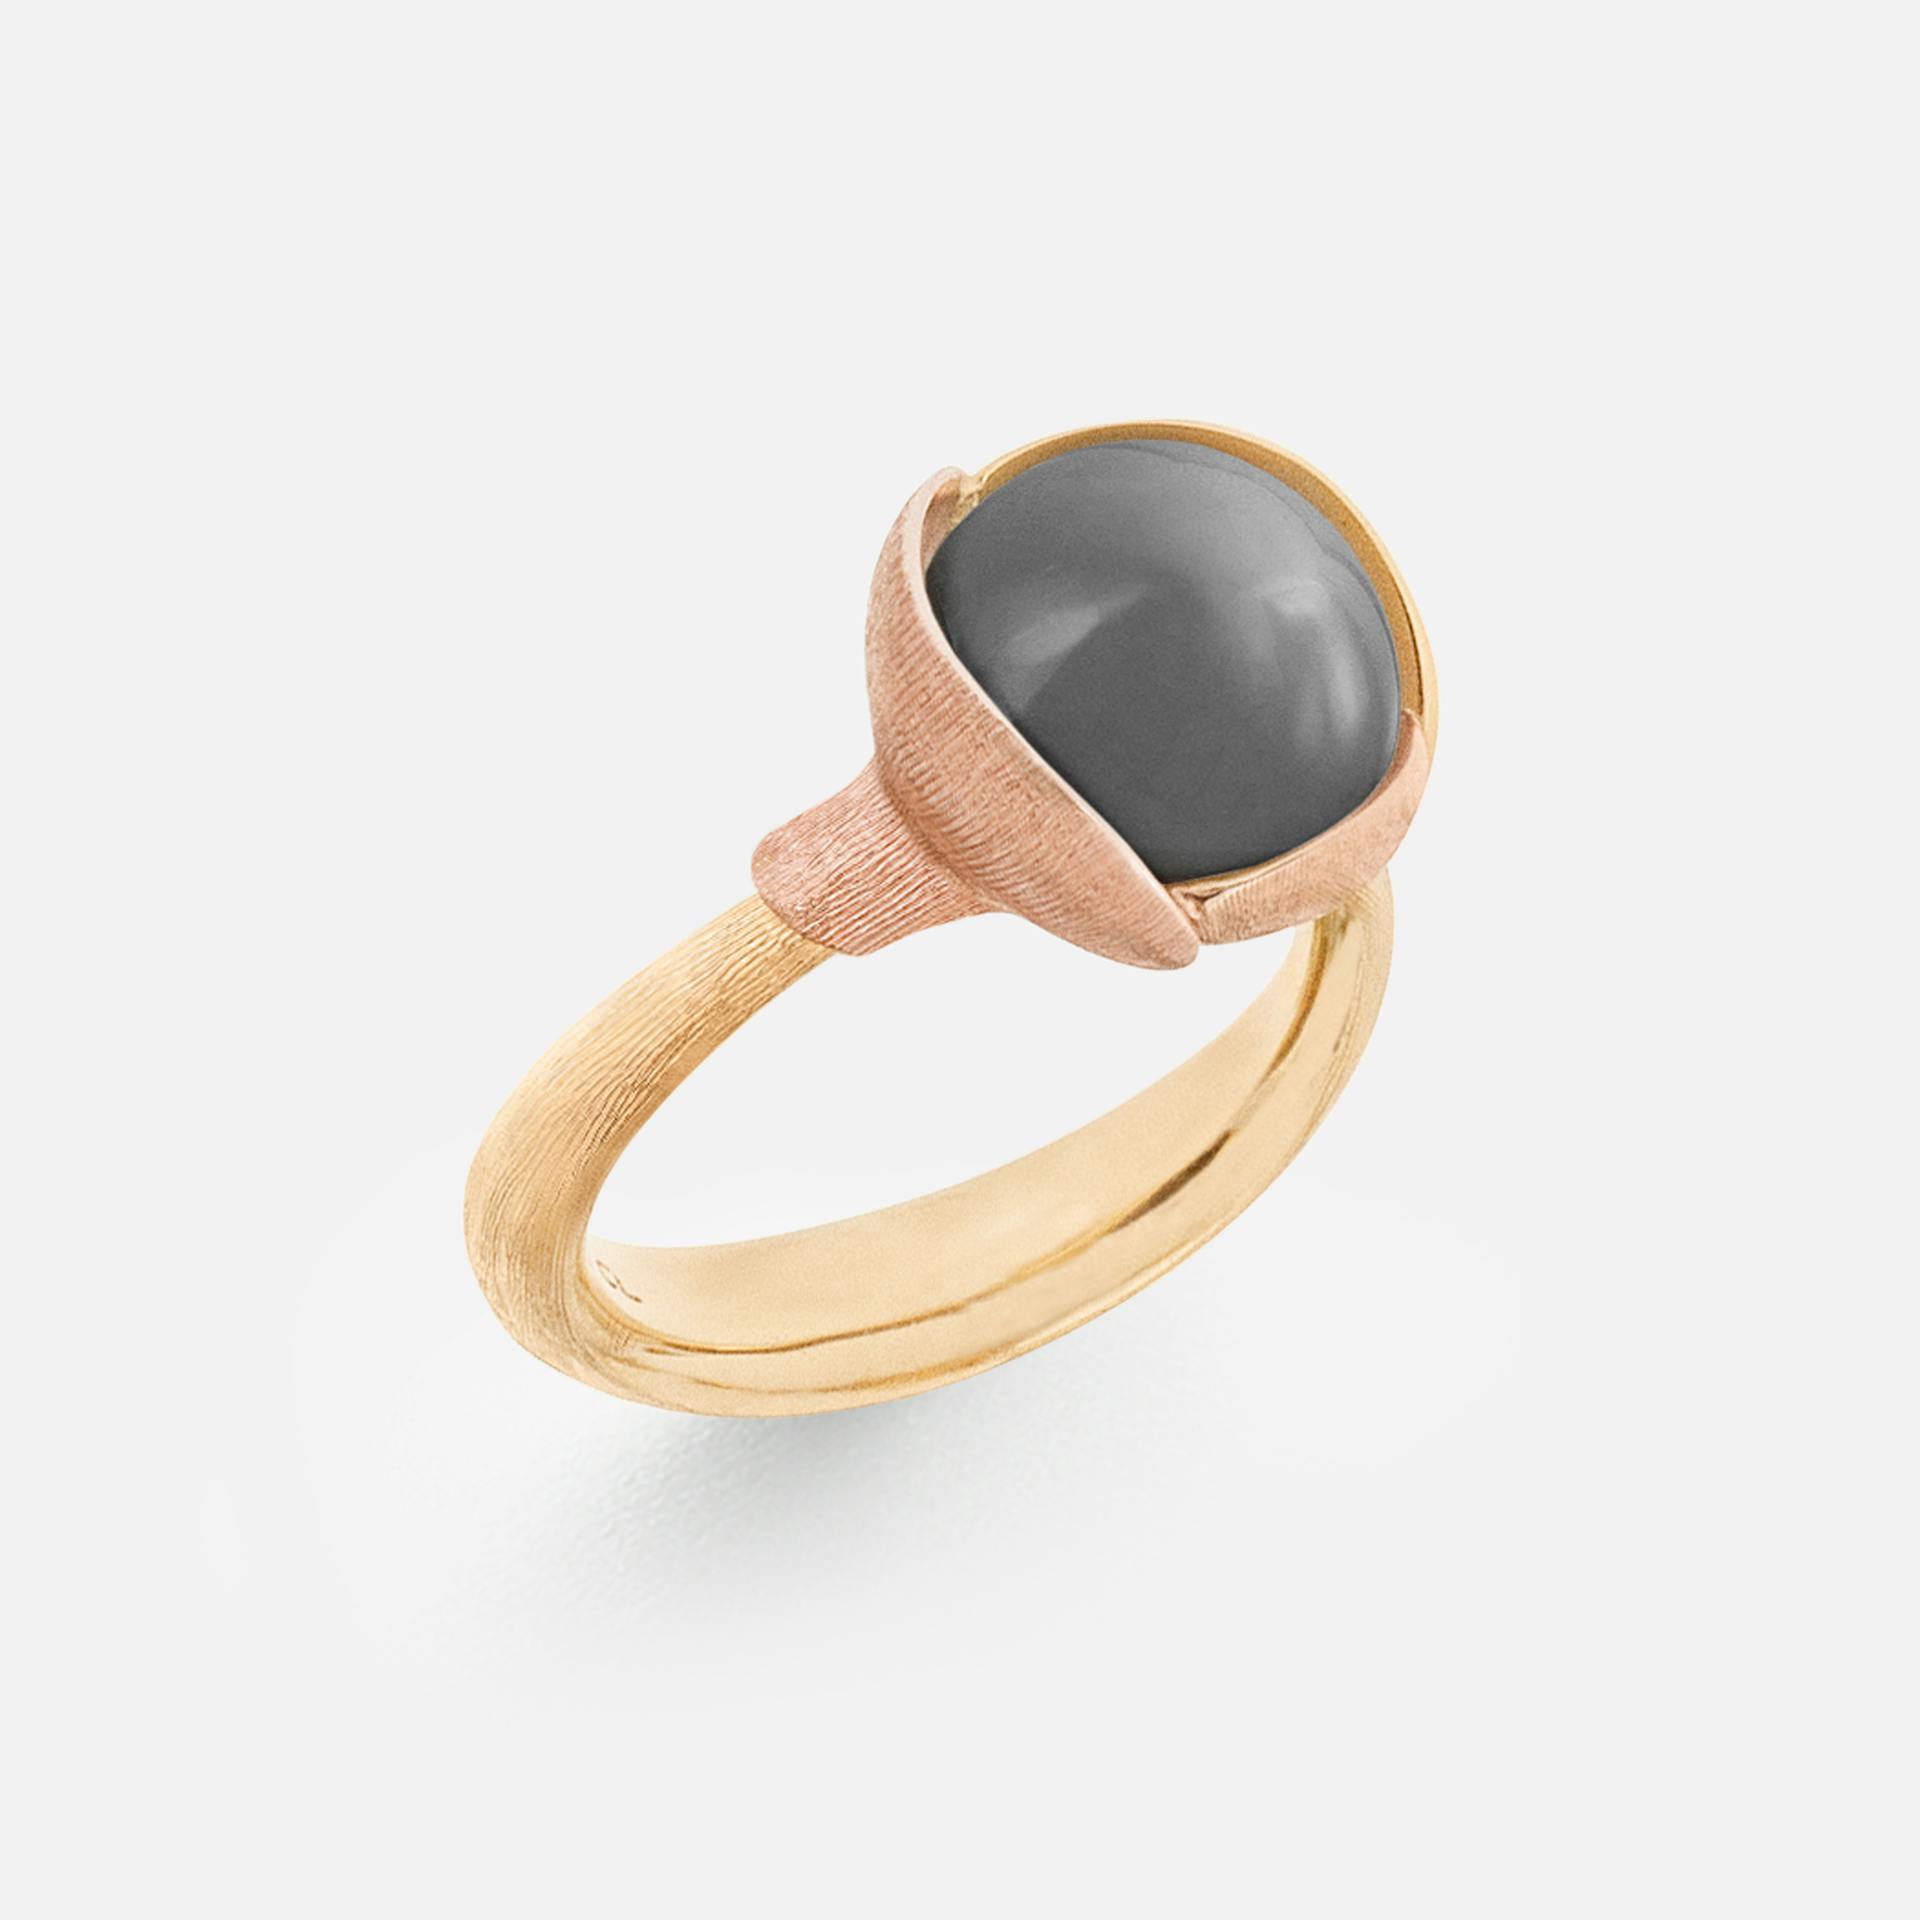 Lotus Ring size 2 in Yellow and Rose Gold  with Grey Moonstone  |  Ole Lynggaard Copenhagen